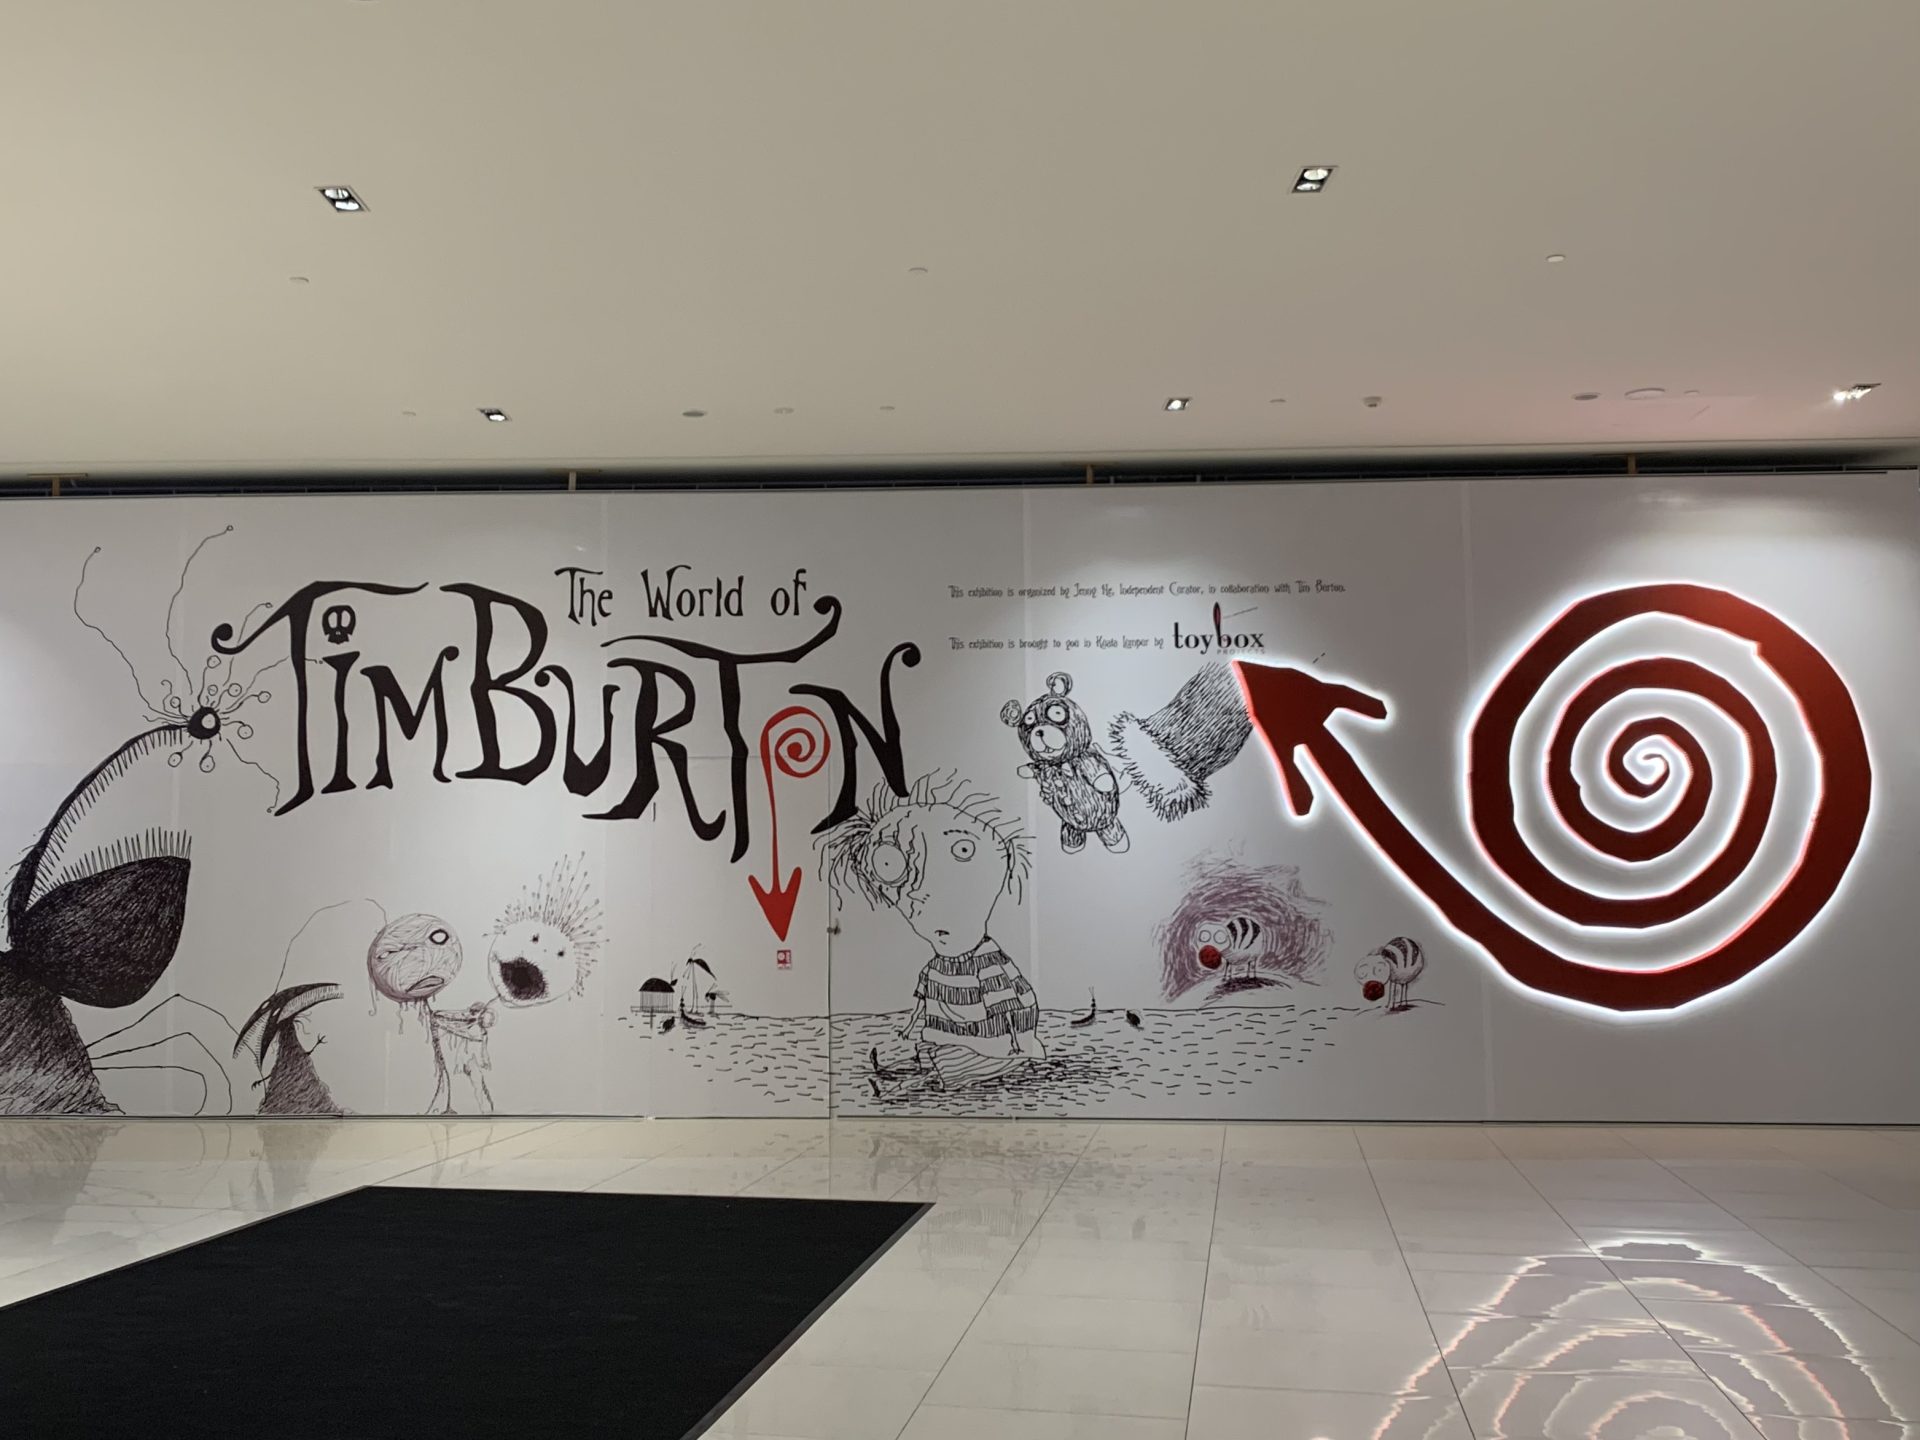 The World of Tim Burton - Front of the exhibition